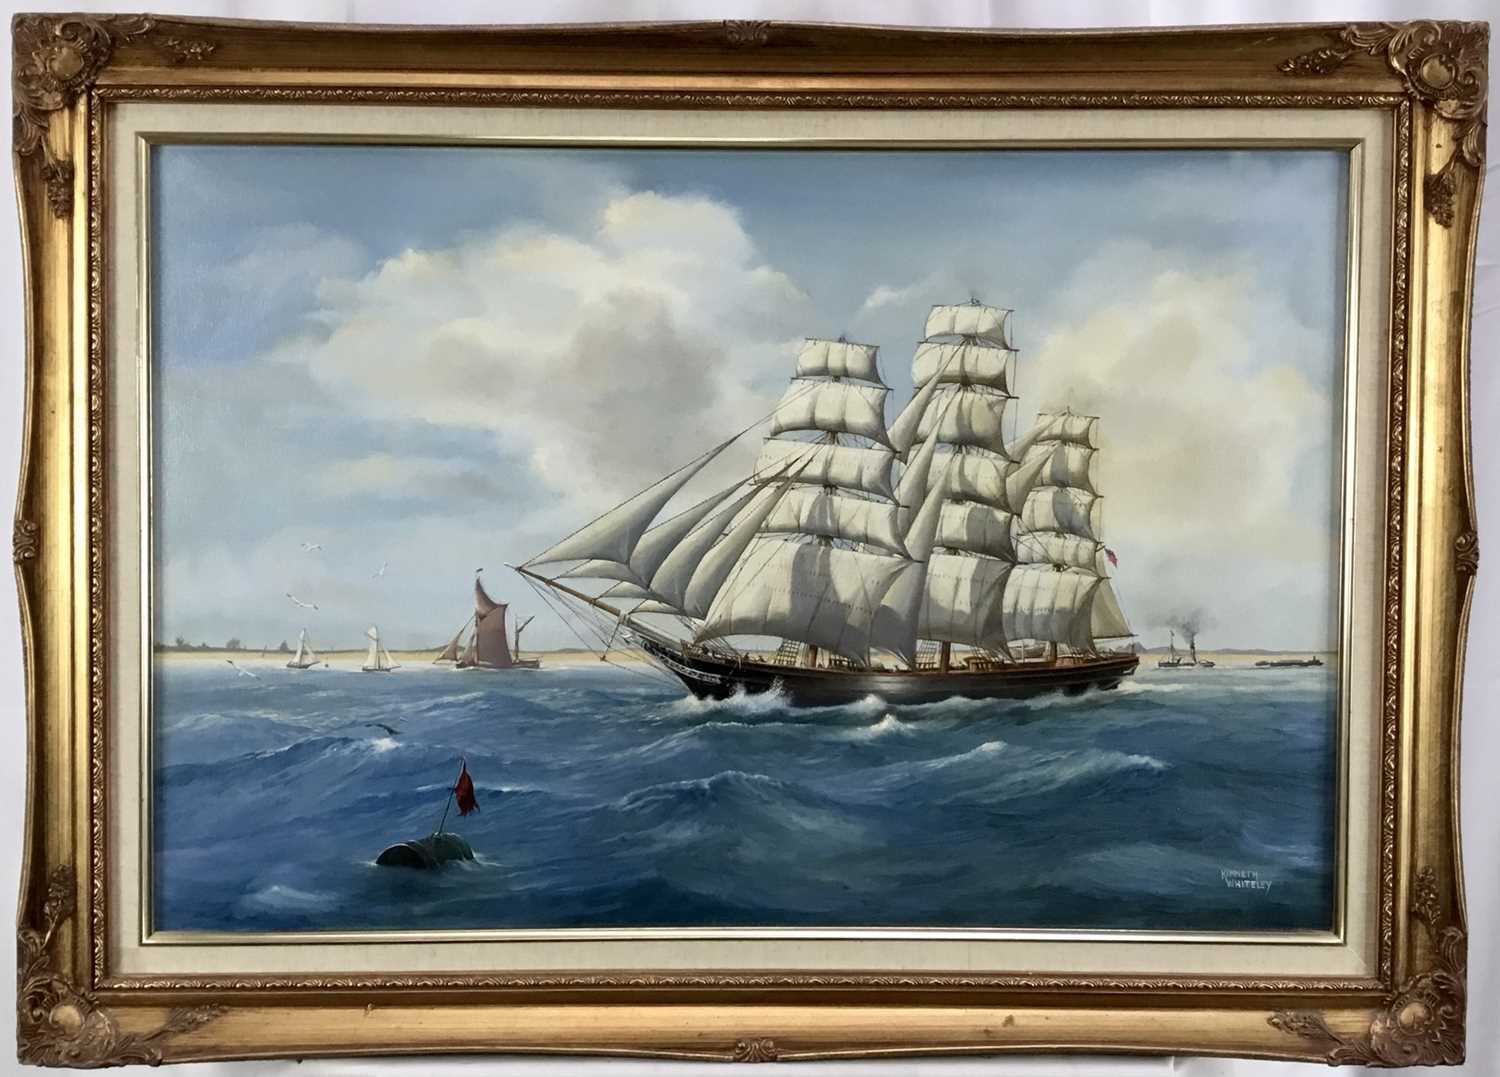 Lot 38 - Kenneth Whitely oil on canvas - The Cutty Sark off the coast, signed, 75cm x 50cm, framed